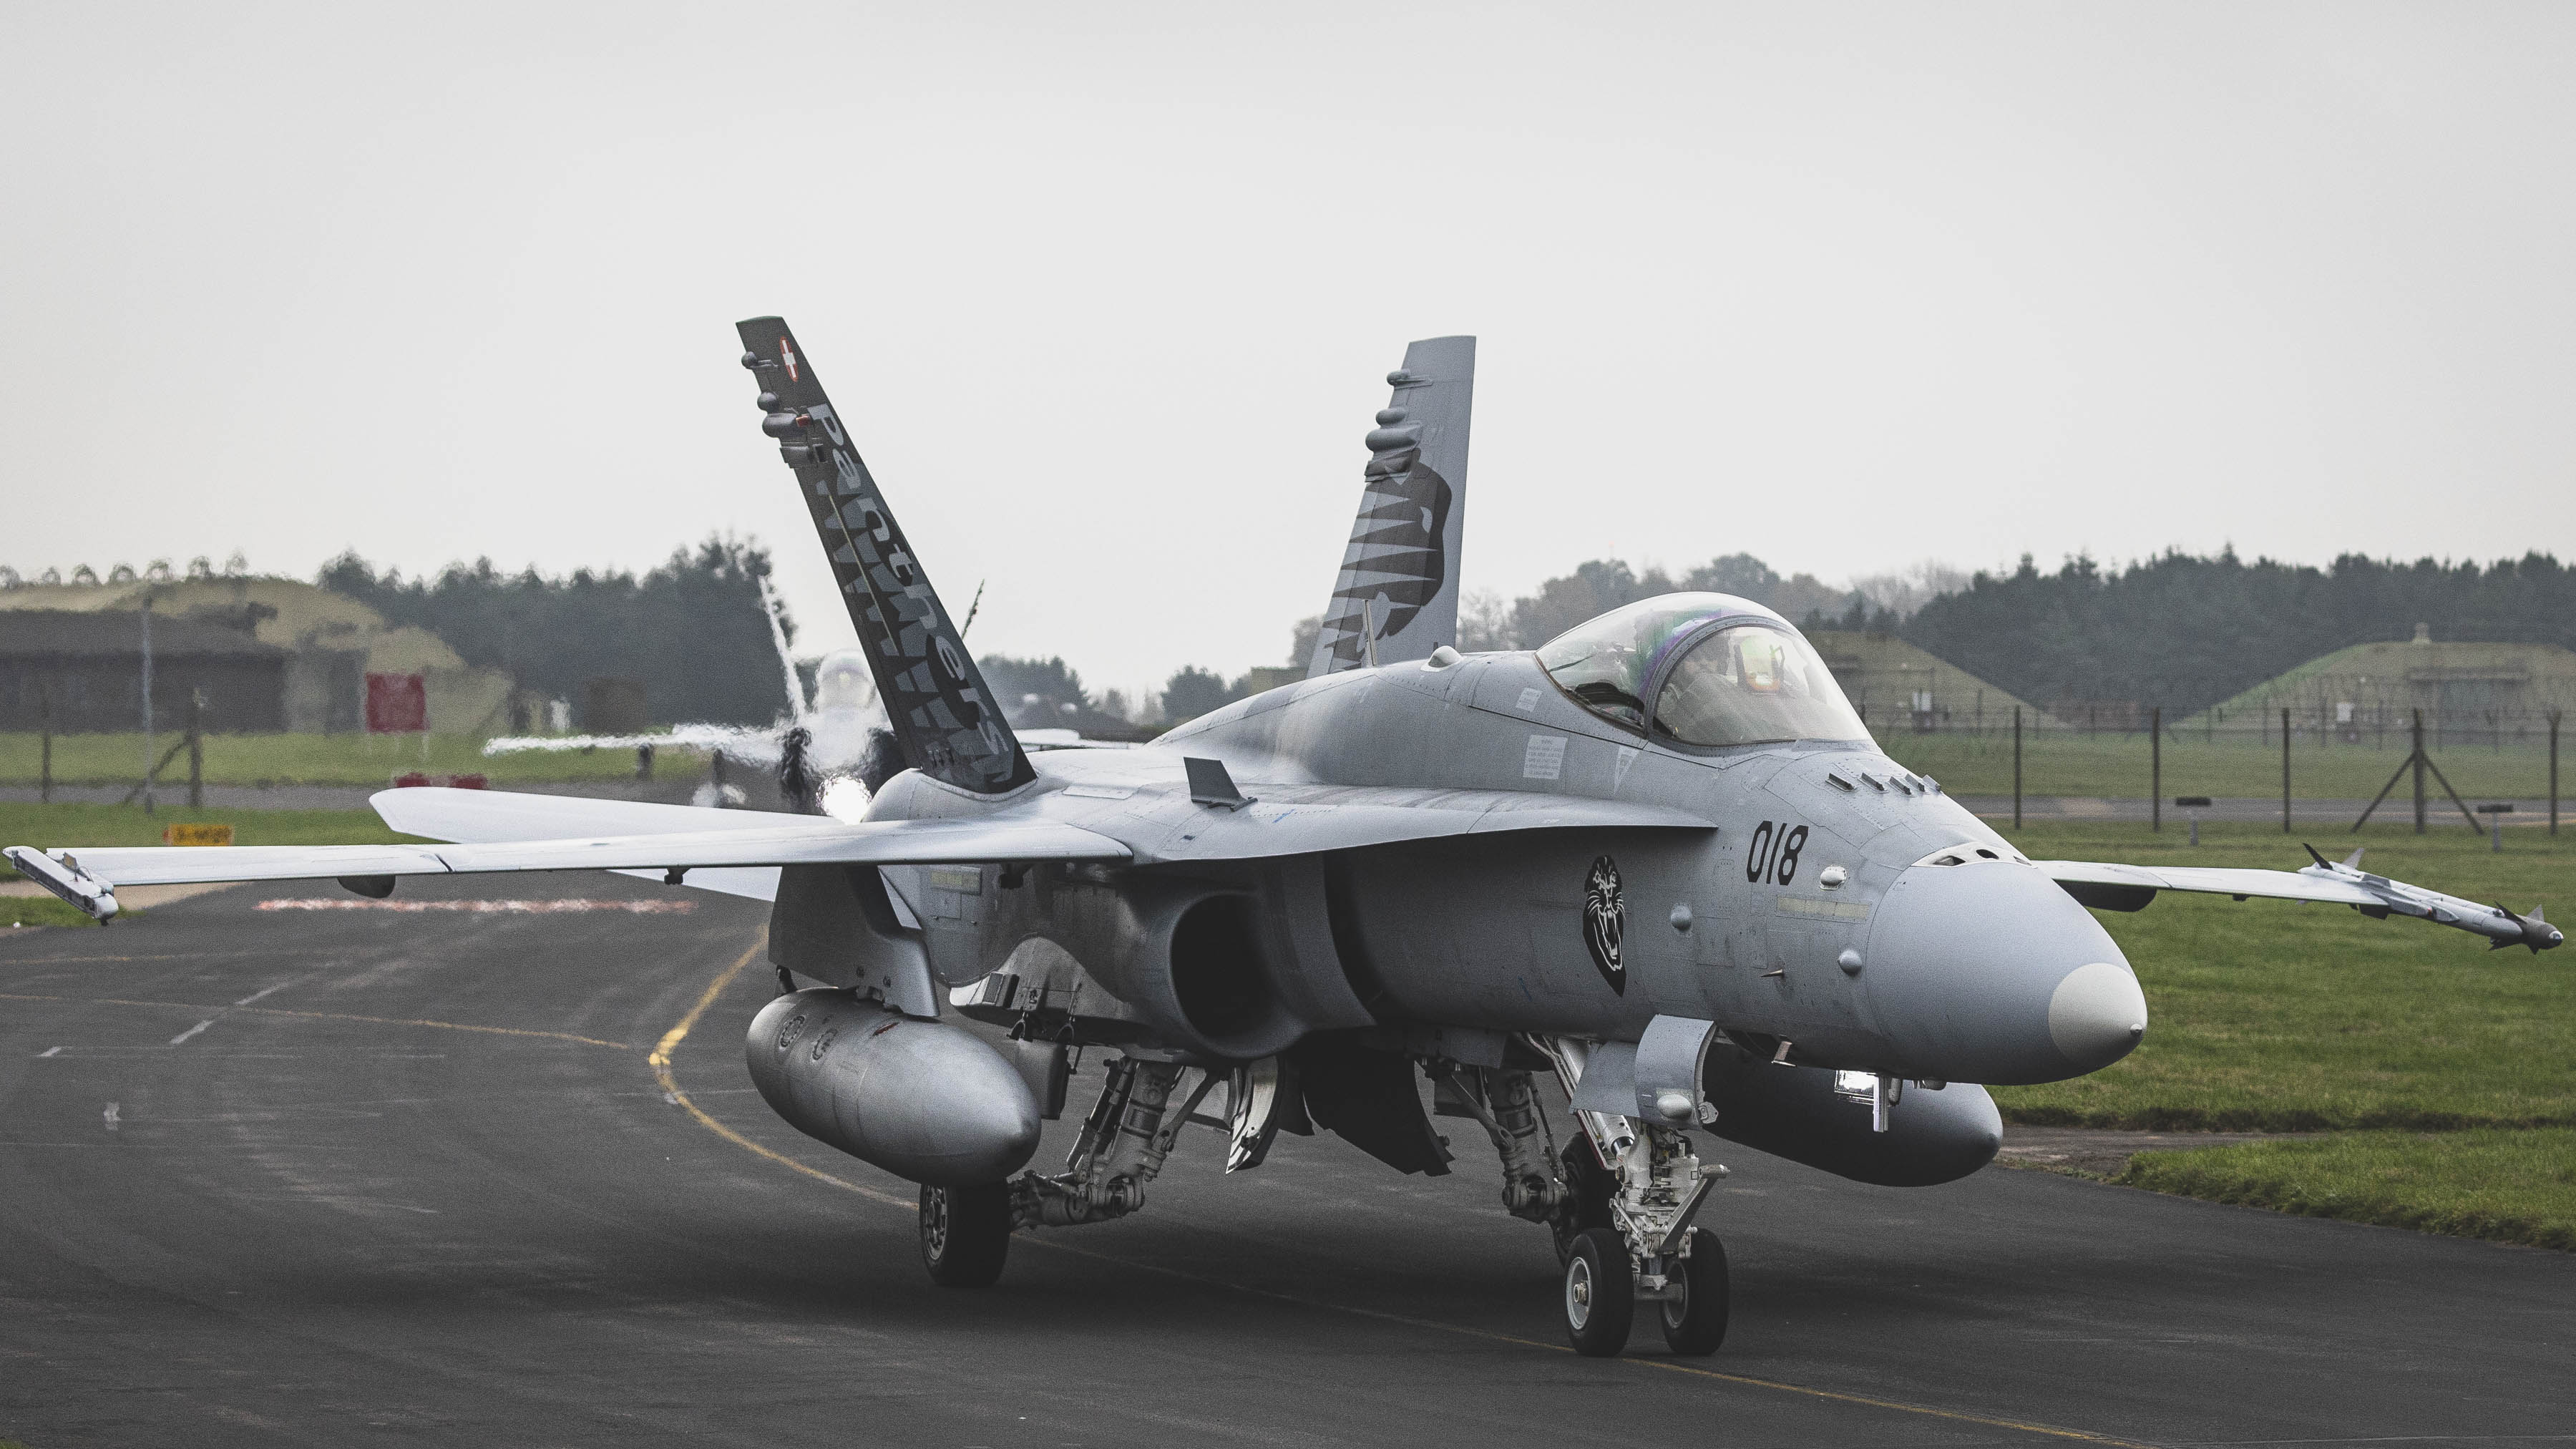 F-18 Hornet aircraft on the airfield.